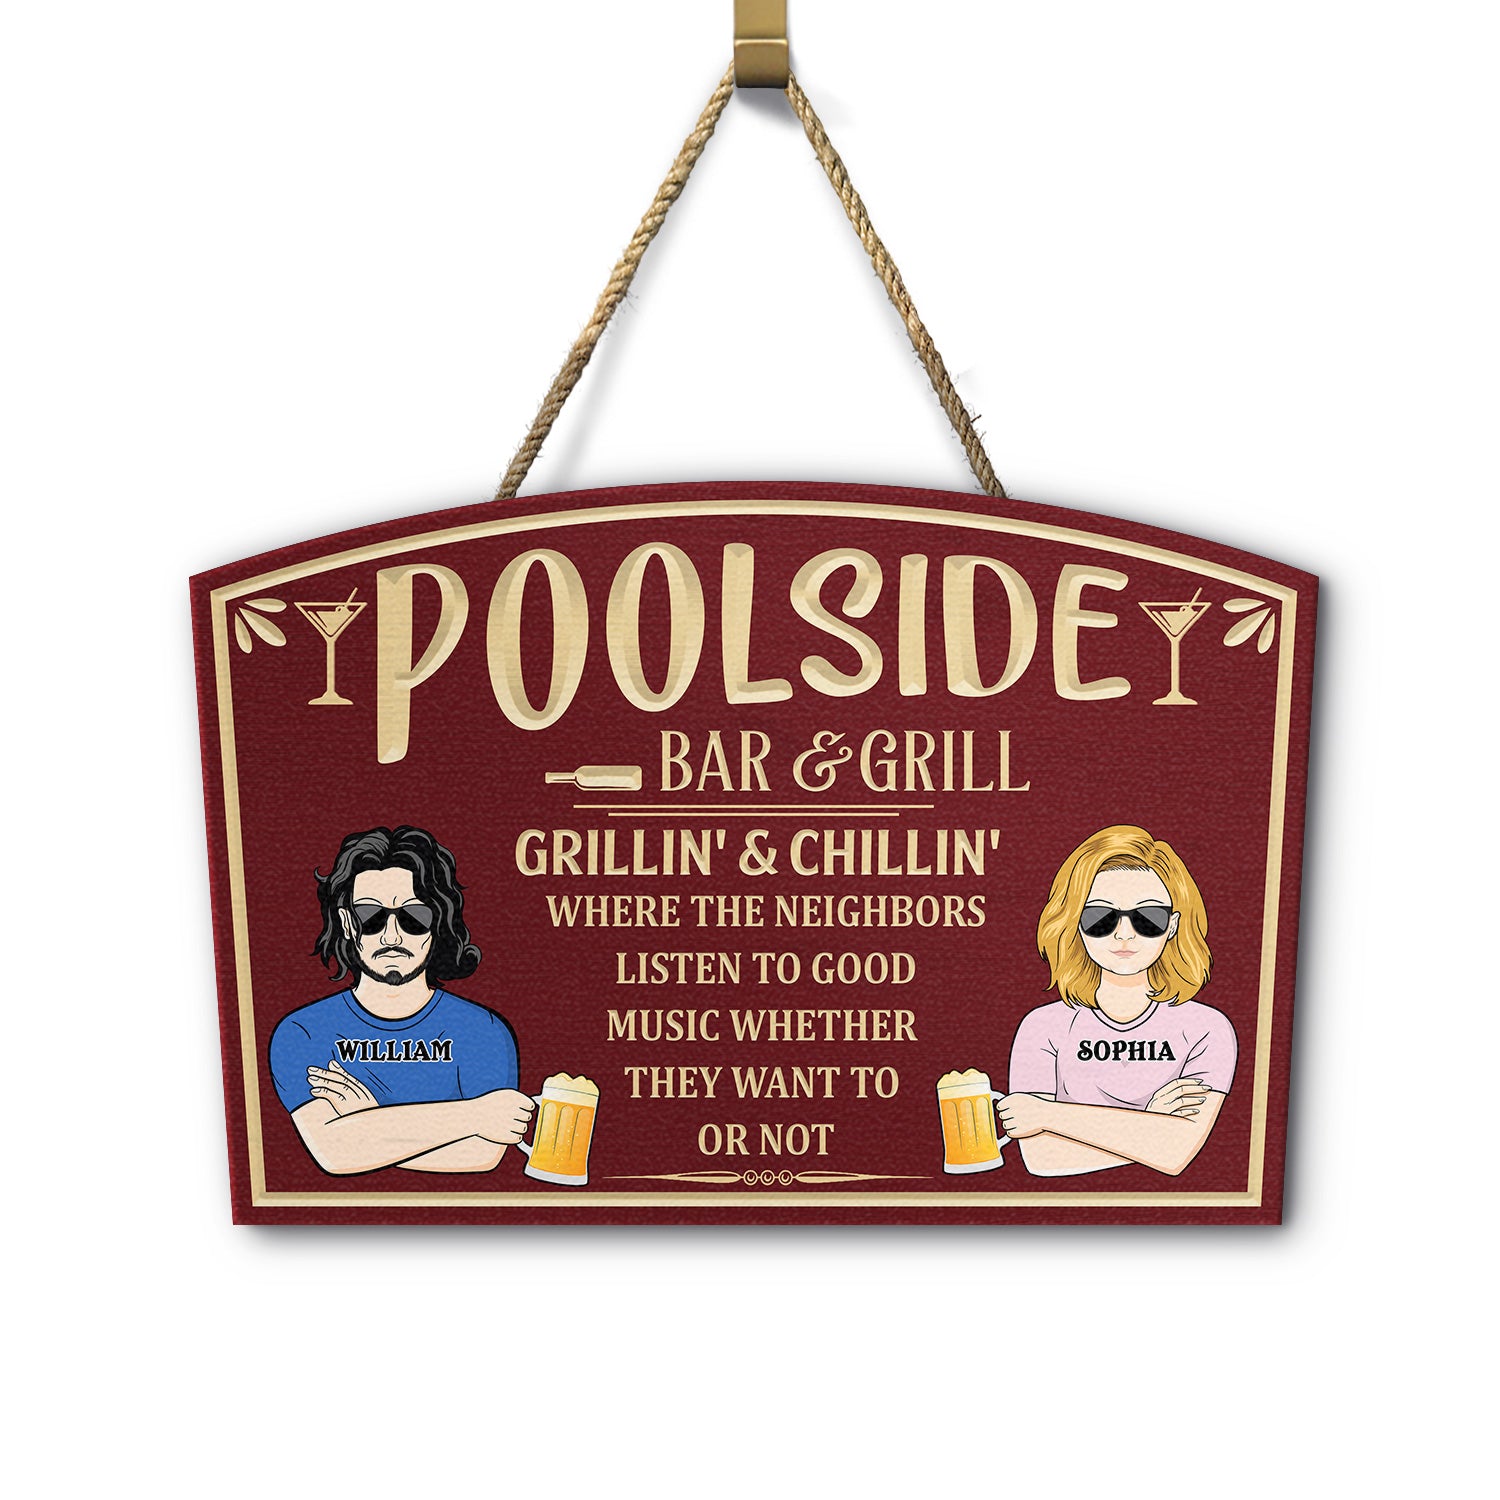 Poolside Bar & Grill Where The Neighbor Listen - Outdoor Decor, Pool Decor - Personalized Custom Shaped Wood Sign